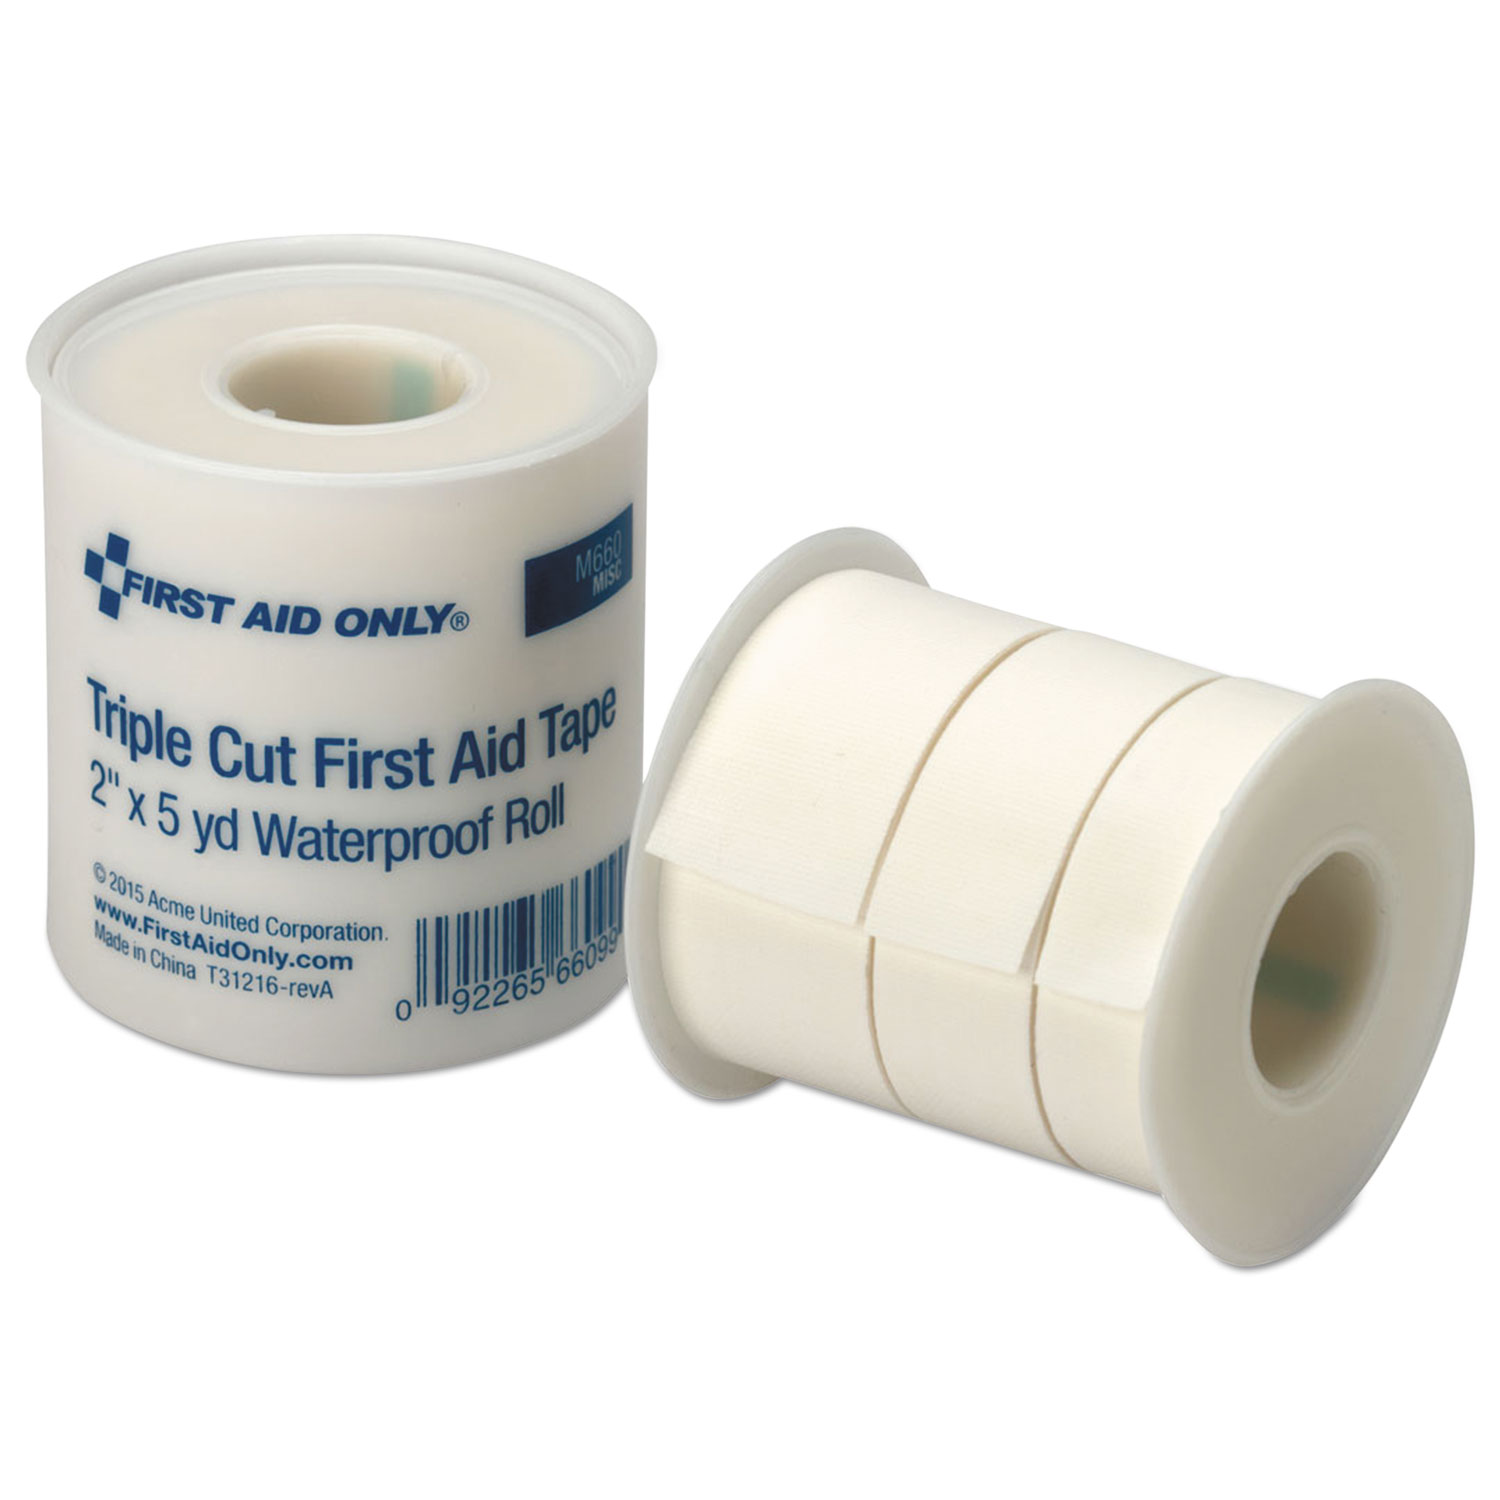  First Aid Only FAE-9089 Refill f/SmartCompliance Gen Business Cab, TripleCut Adhesive Tape,2x5yd Roll (FAOFAE9089) 